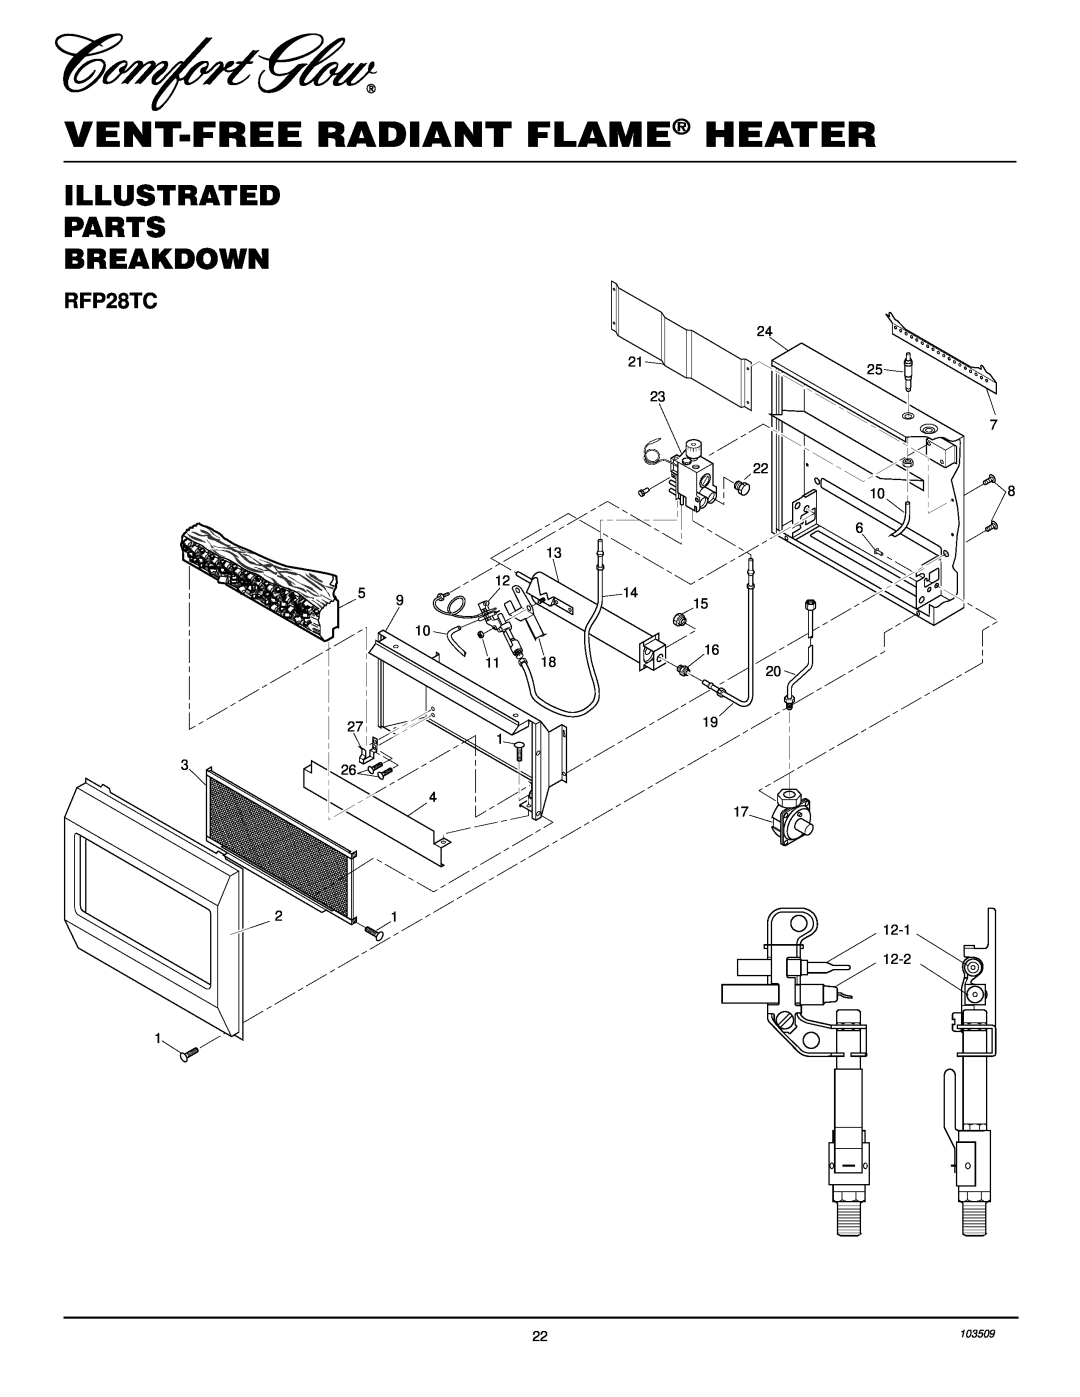 Desa Tech RFP28TC installation manual Illustrated Parts Breakdown, Vent-Freeradiant Flame Heater 